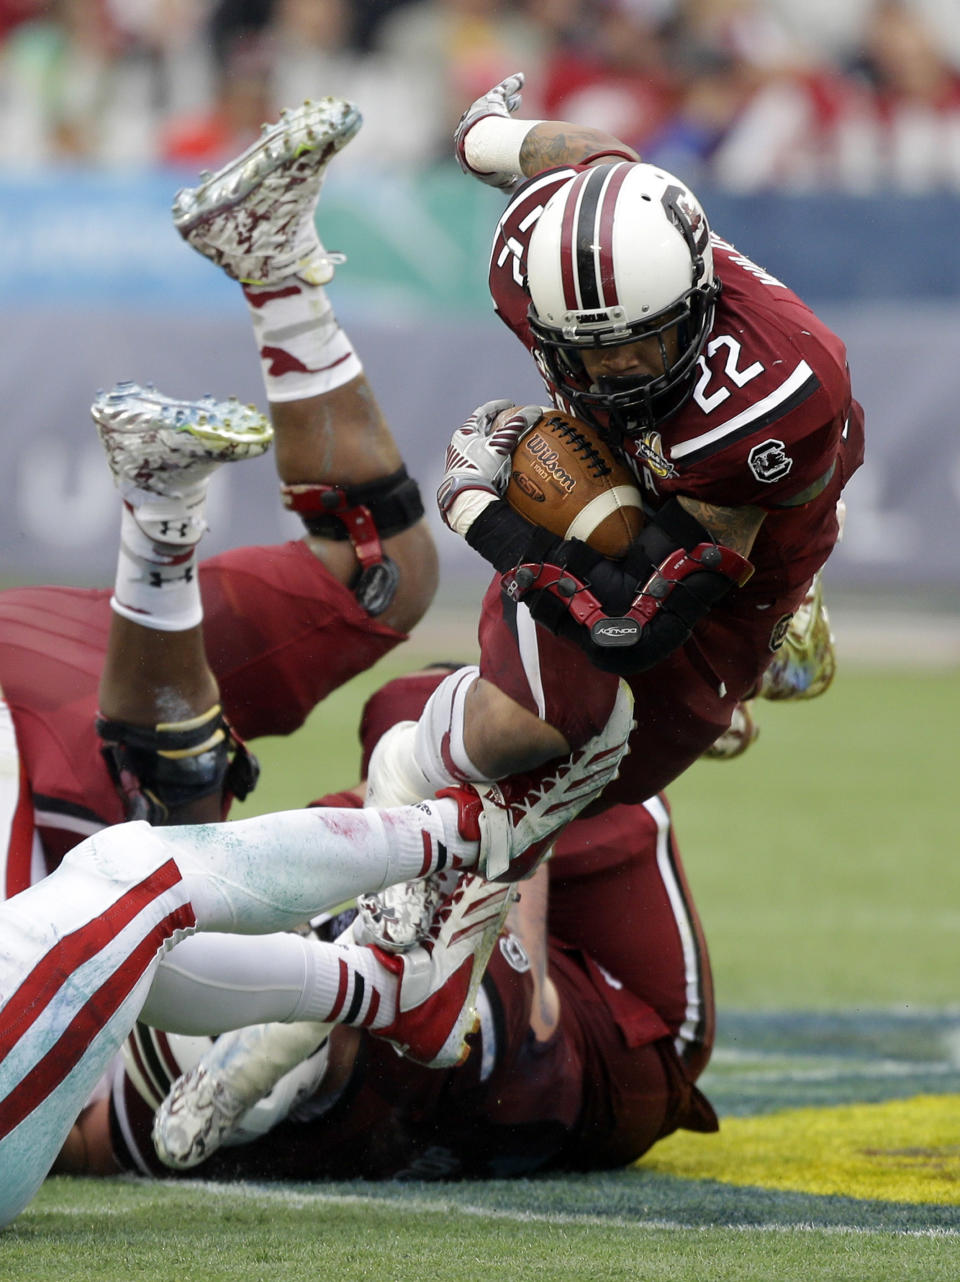 South Carolina running back Brandon Wilds (22) dives for a short gain as he is tripped up by the Wisconsin defense during the first half of the Capital One Bowl NCAA college football game in Orlando, Fla., Wednesday, Jan. 1, 2014.(AP Photo/John Raoux)